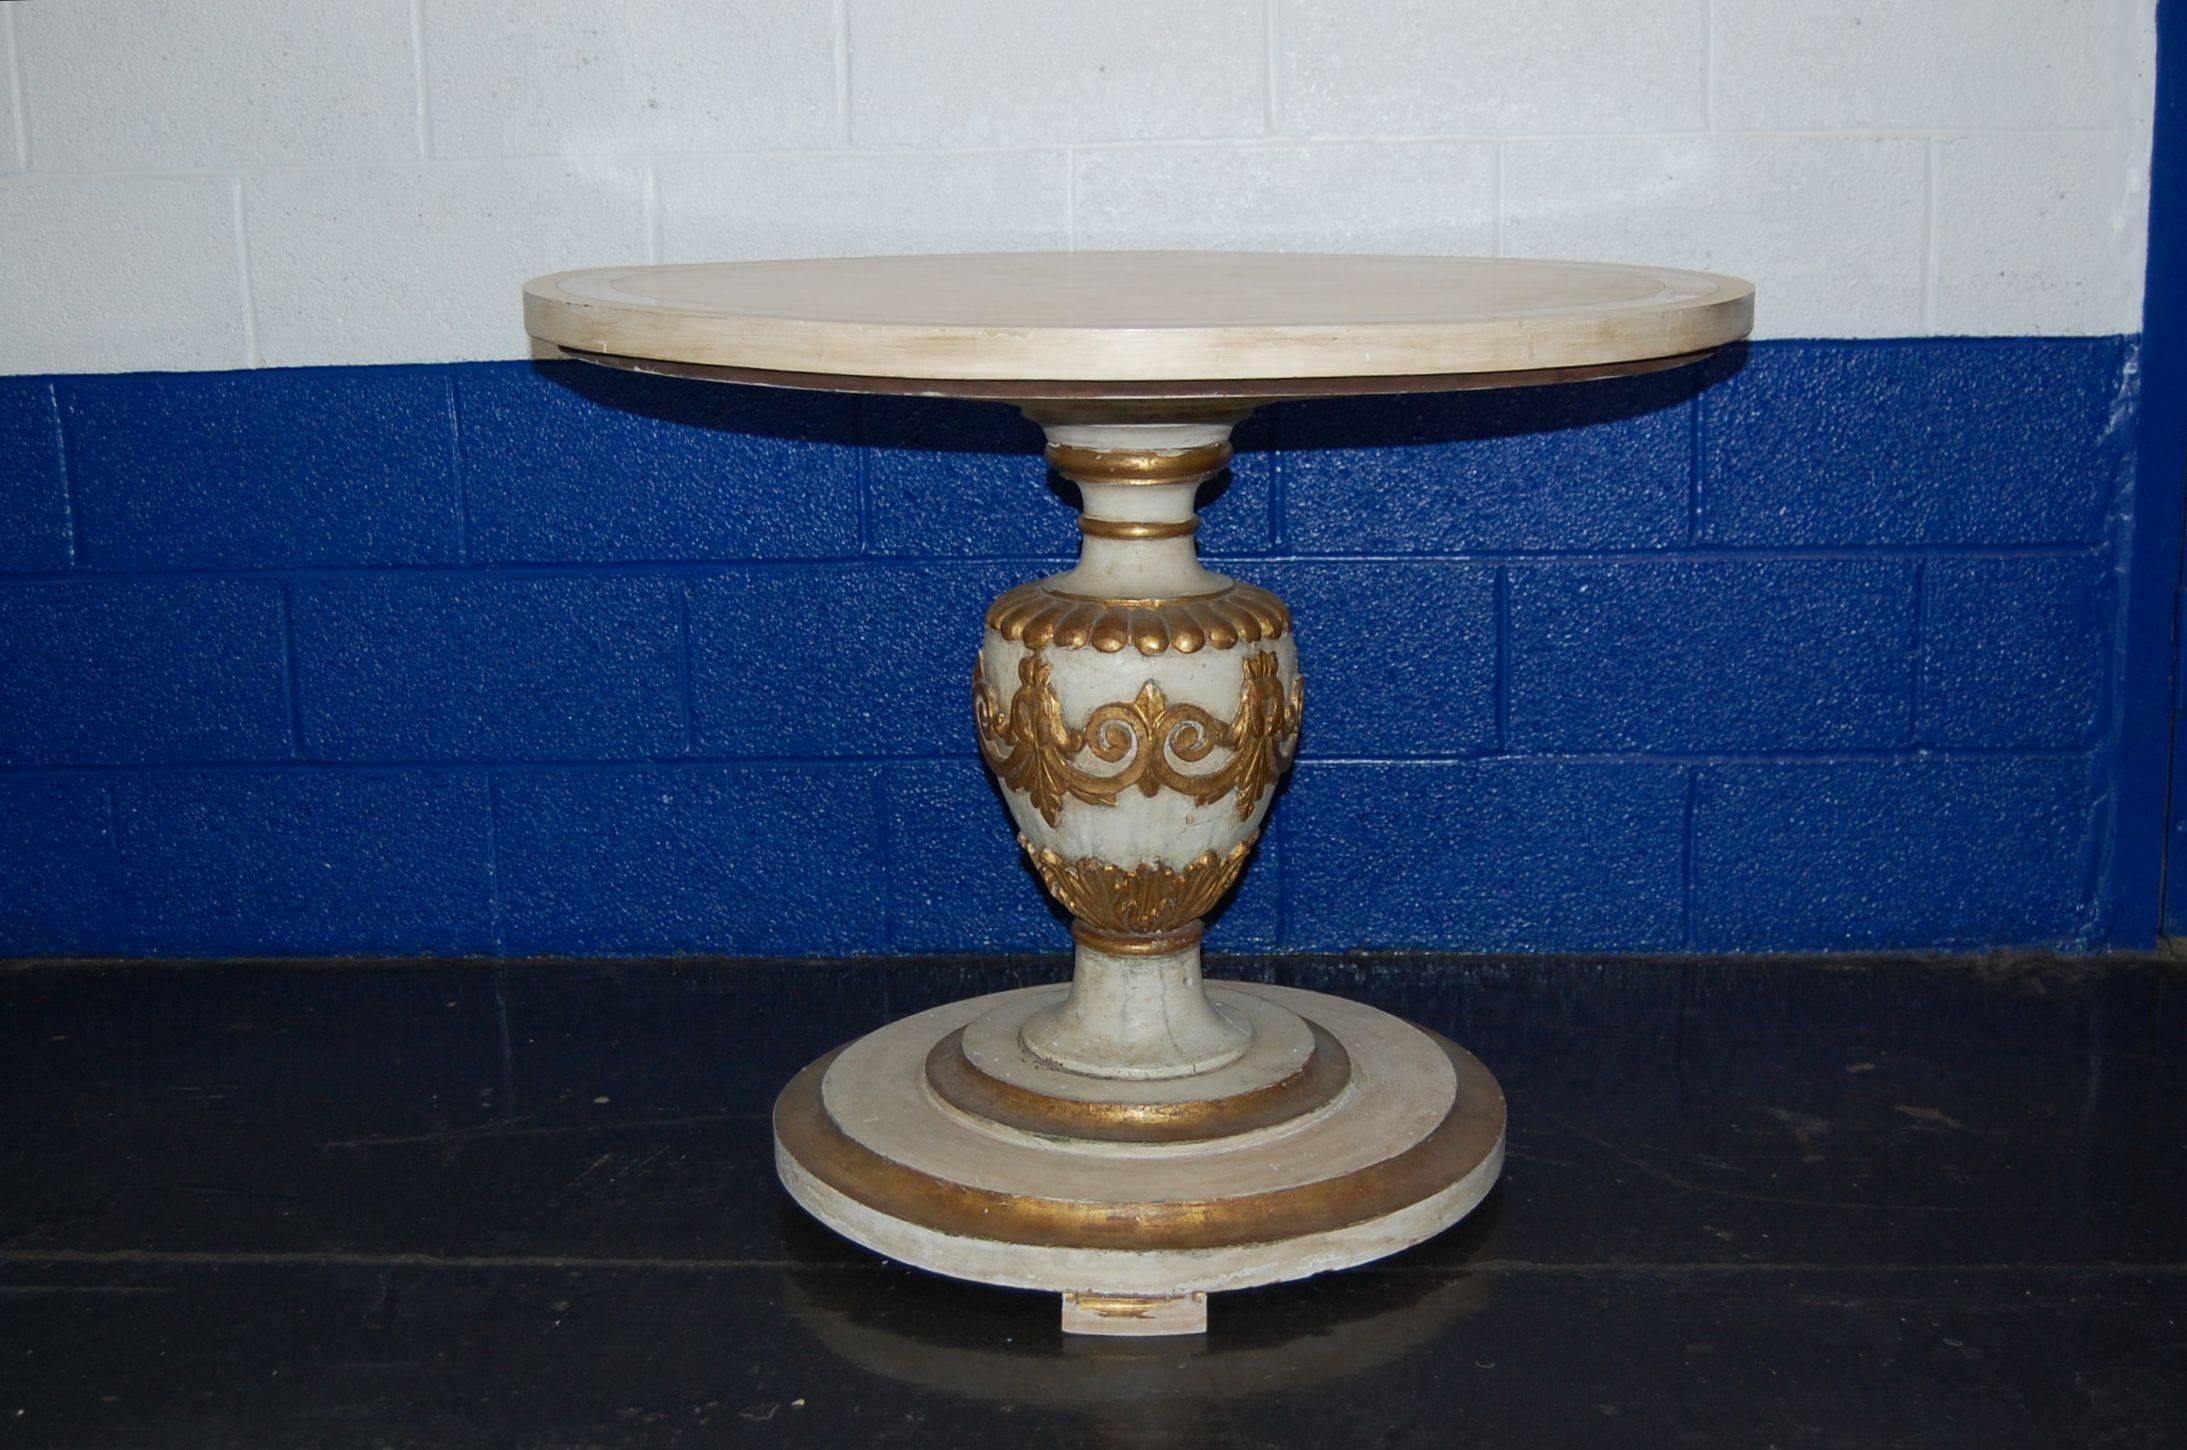 Painted breakfast table possibly imported by Michellini. Very heavy carved wood urn shaped column on circular base with gold leaf accents, 28 inches tall. Original glazed finish to appear as antique, Measures: 35 3/4 inches in diameter.